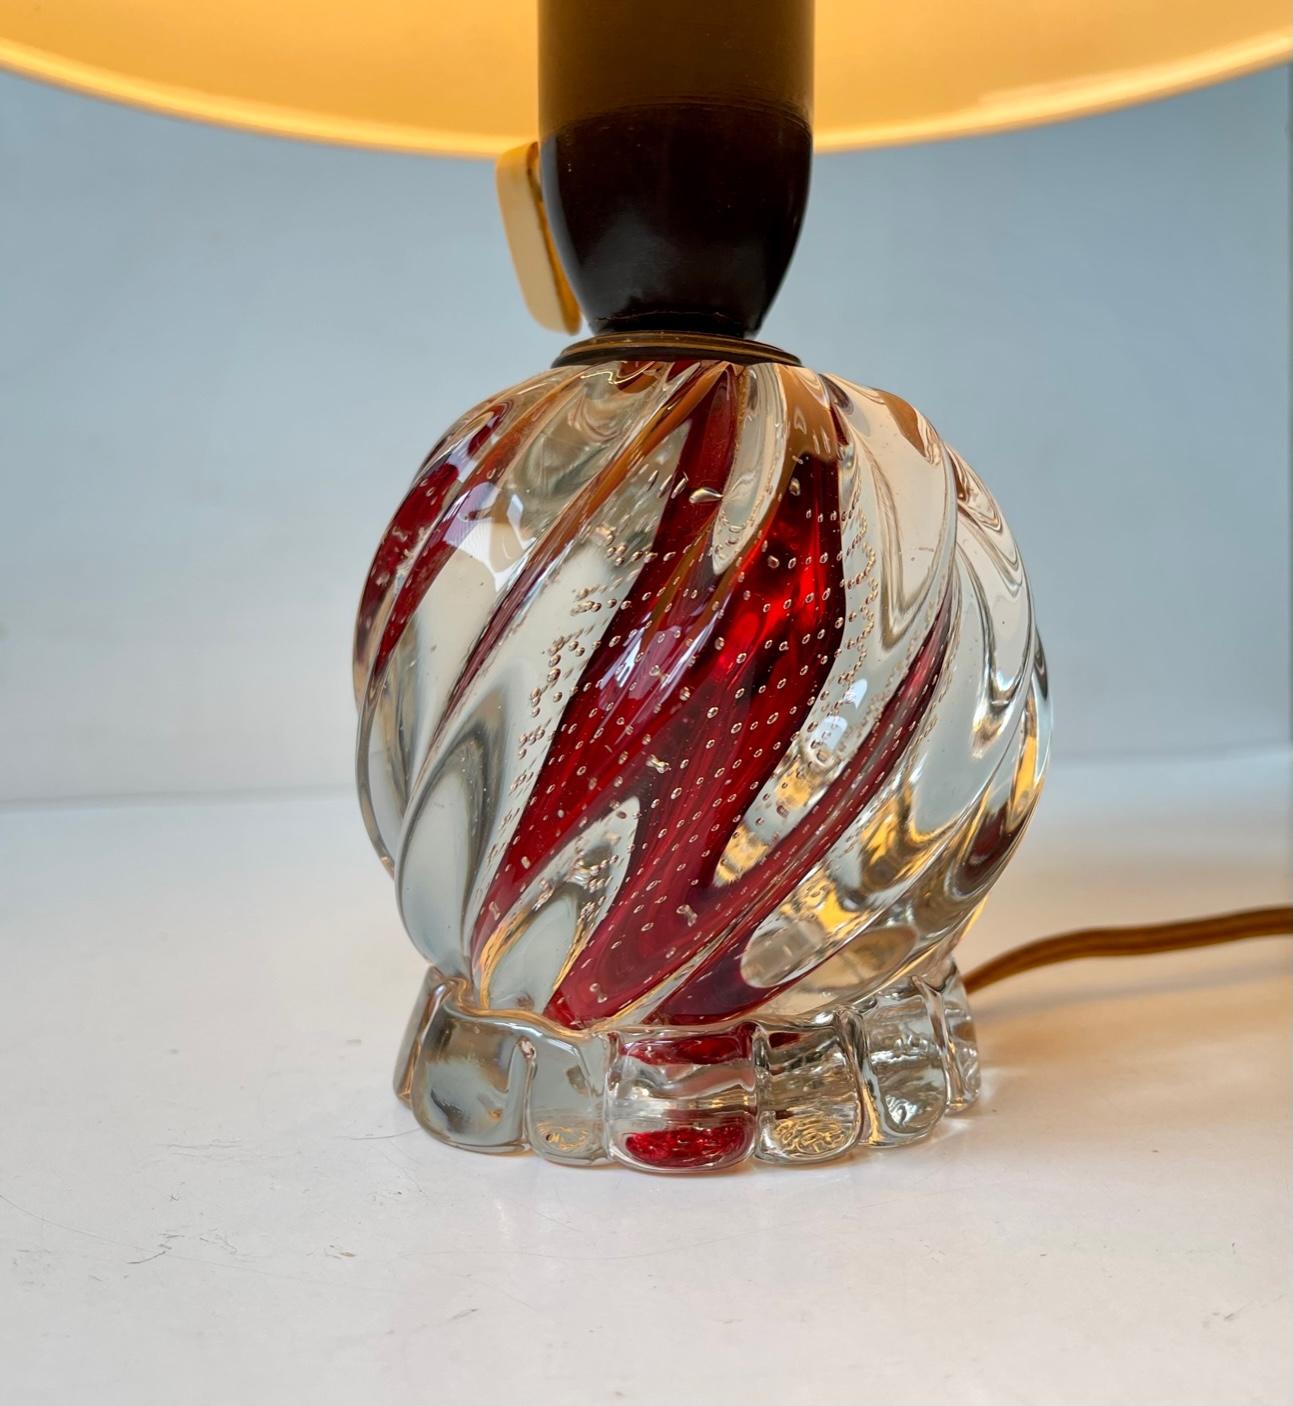 Small fluted table lamp in red and clear hand-blown glass with internal air bubbles. Made in Murano Italy during the 1950s probably by Seguso. It features a off-white textile shade and a bulit-in on/of switch to its original bakelite socket.